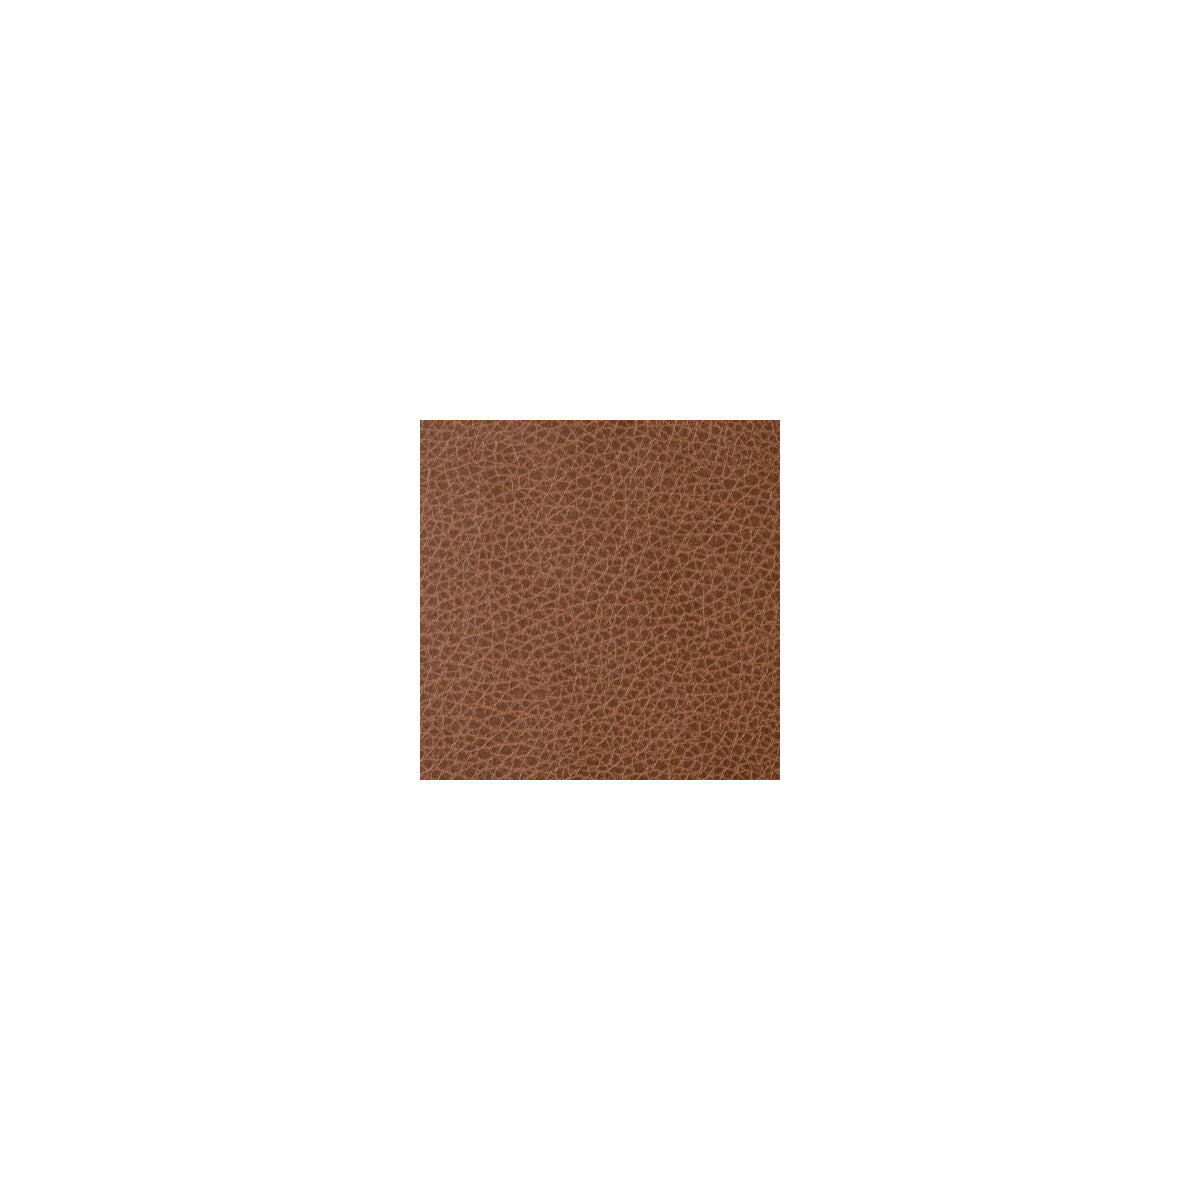 Foothill fabric in cacao color - pattern FOOTHILL.606.0 - by Kravet Contract in the Sta-Kleen collection